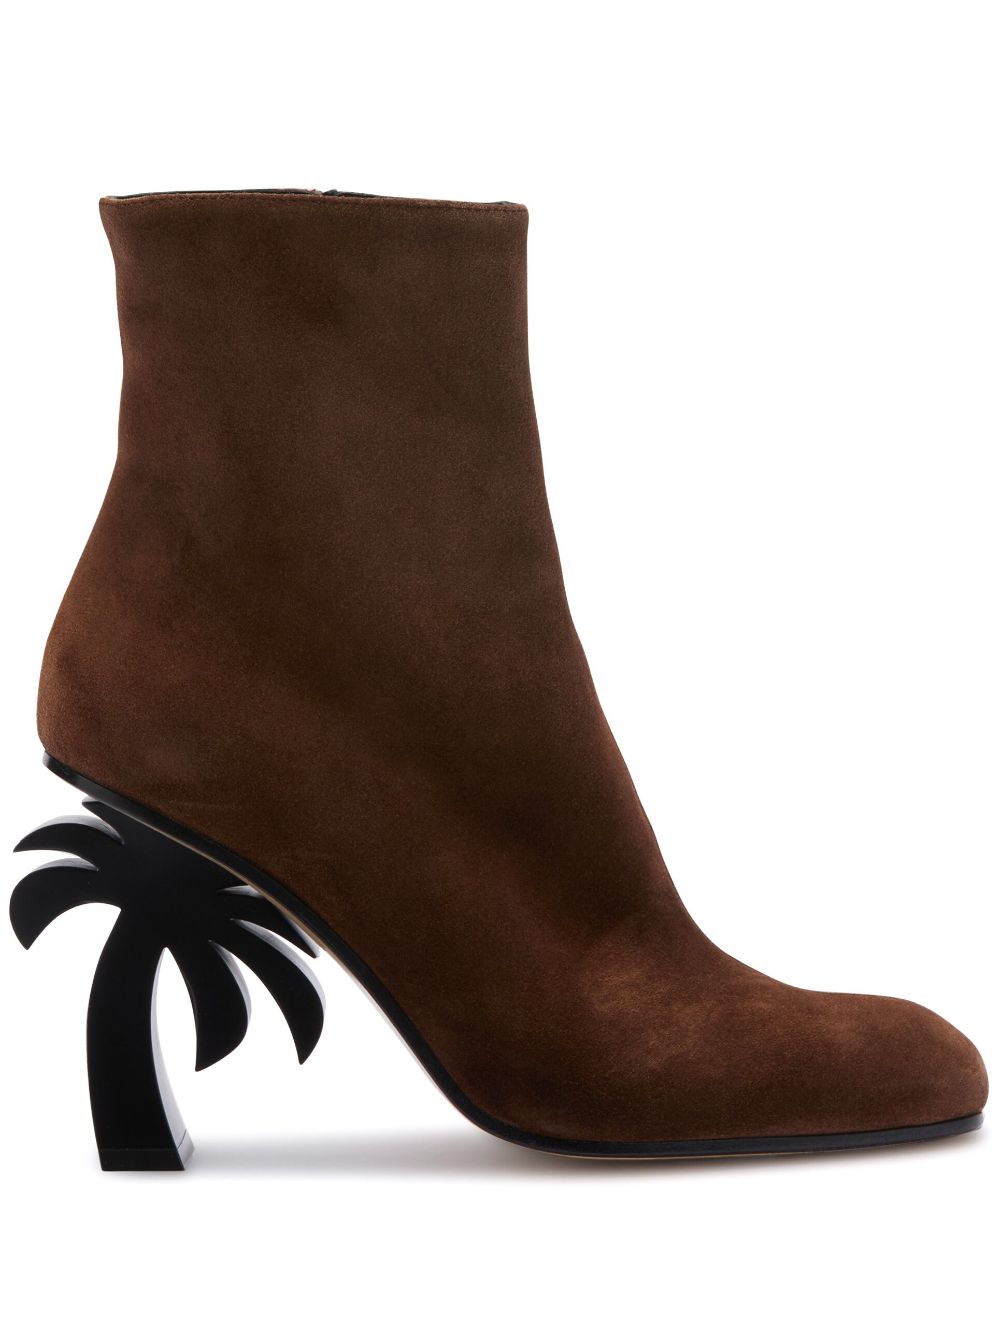 Palm-heel 95mm suede ankle boots